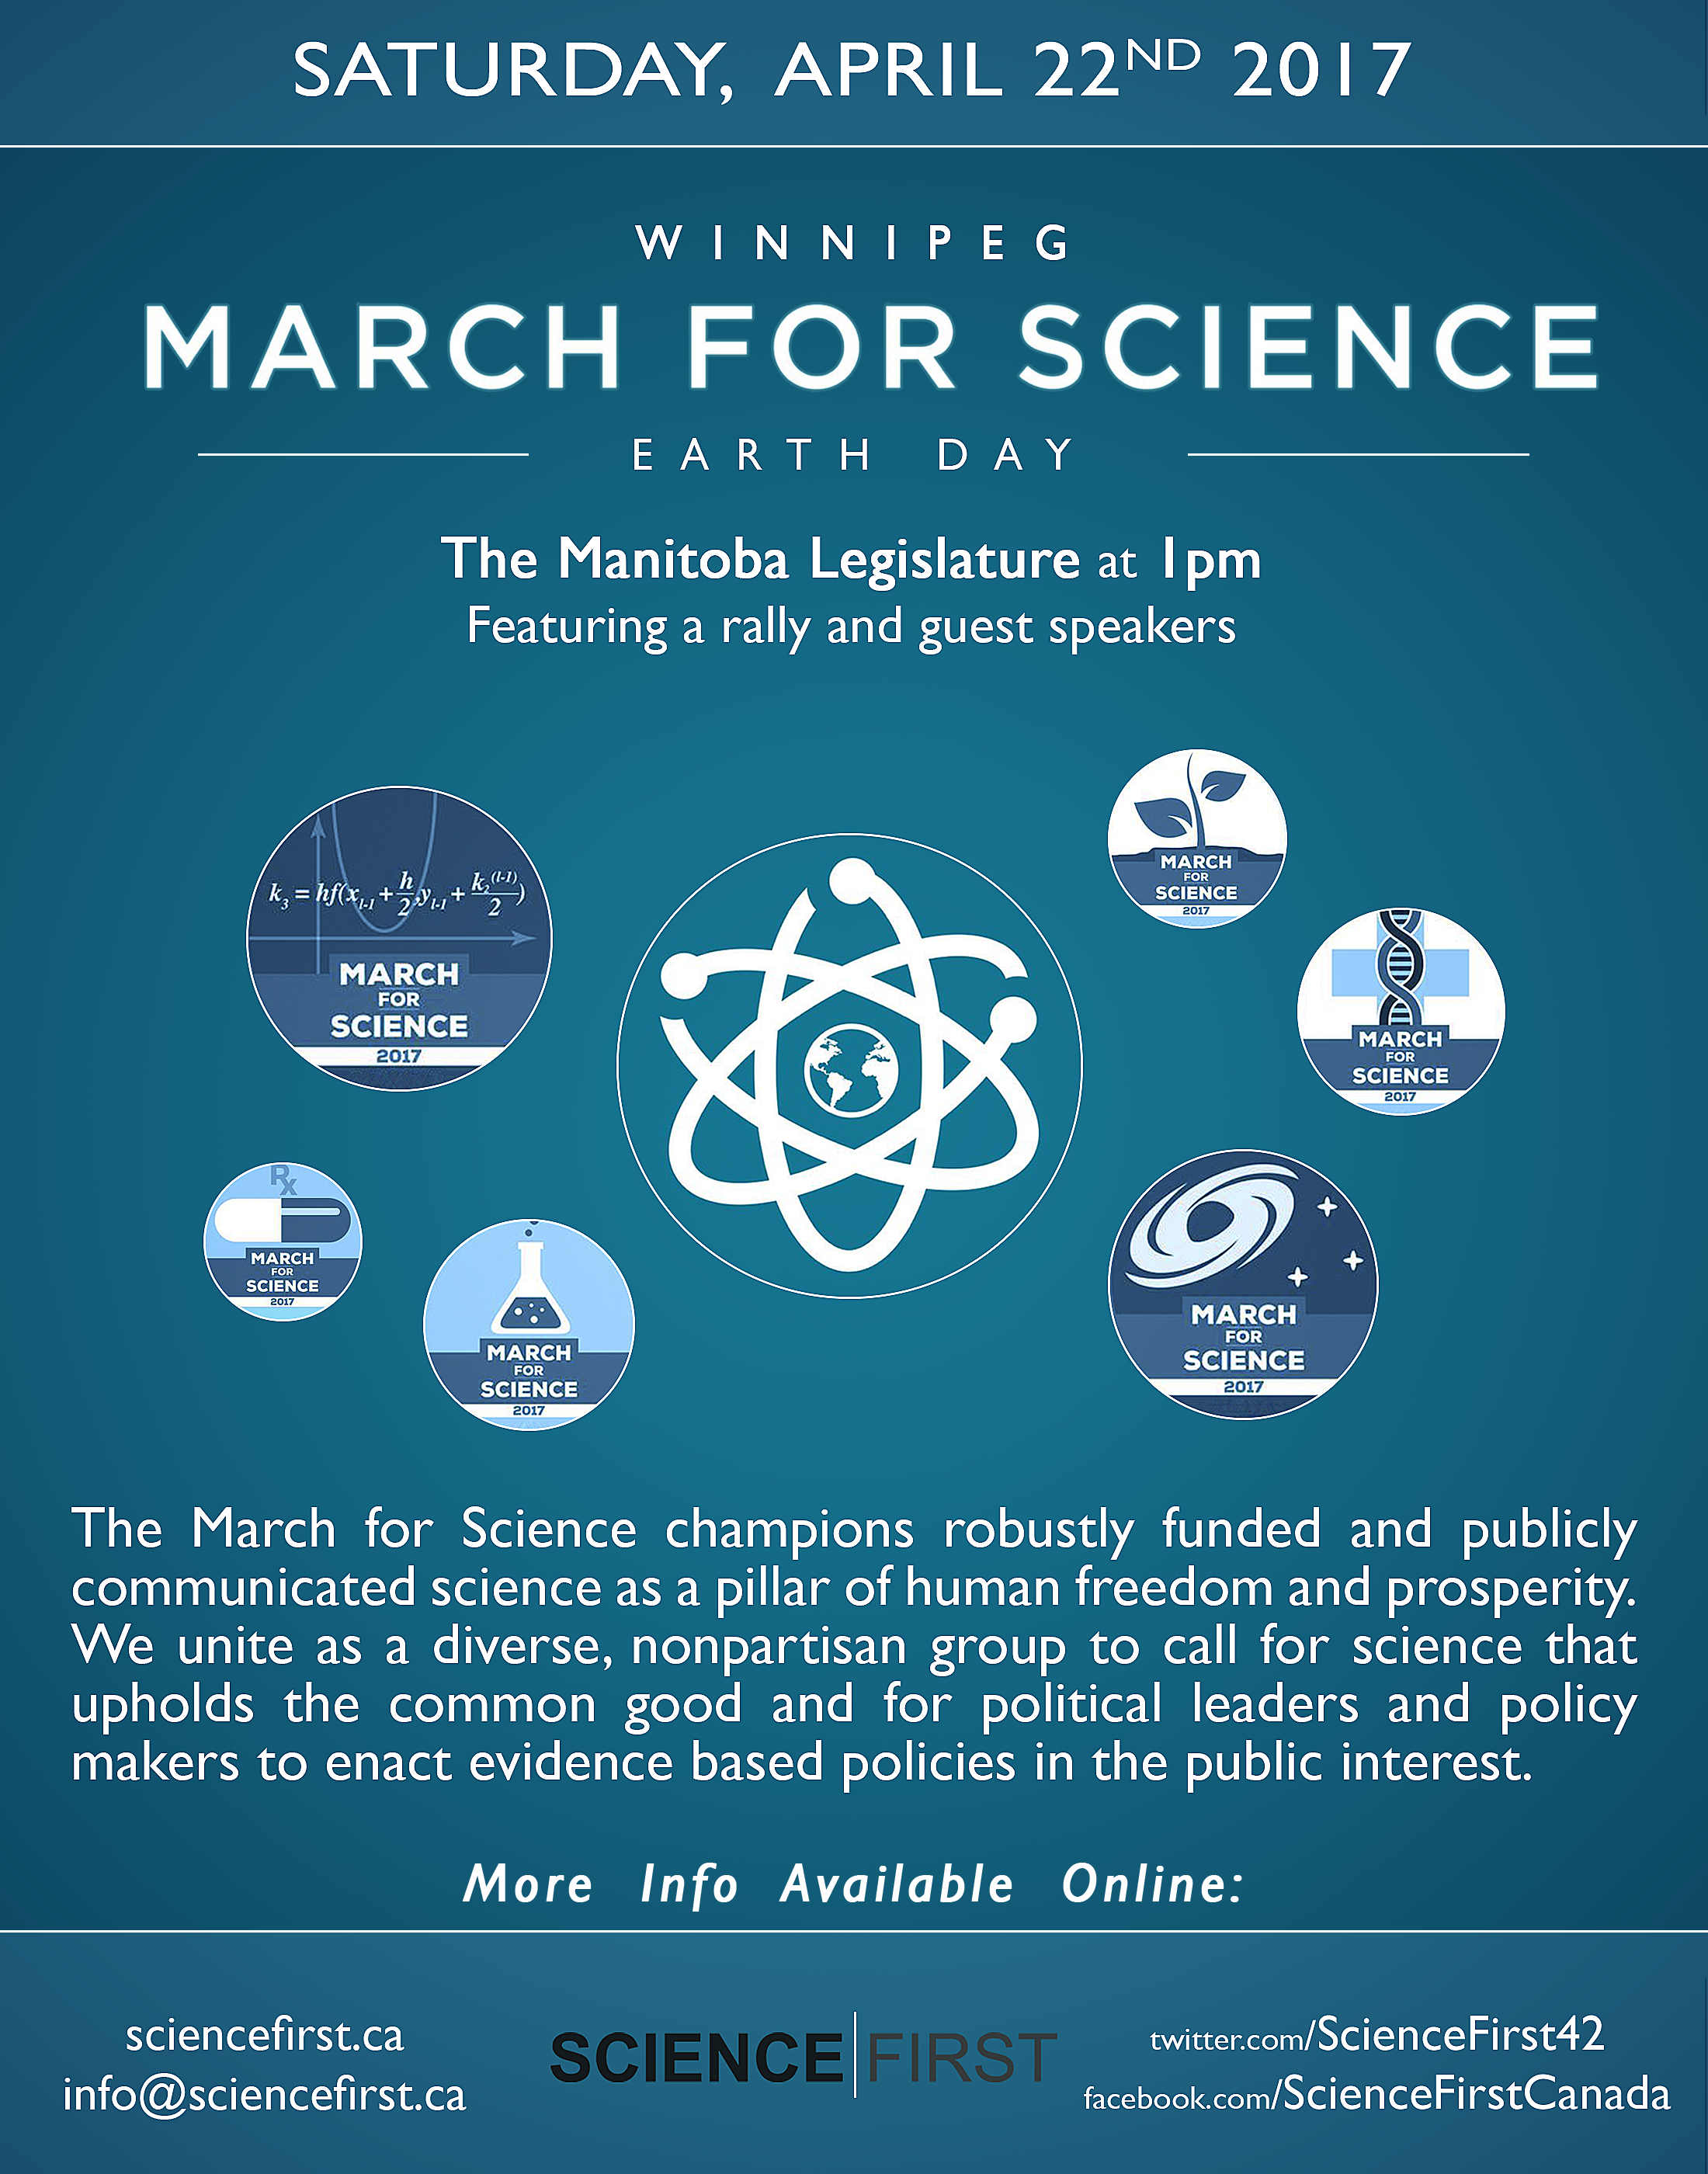 March For Science - Winnipeg - April 22nd, 2017